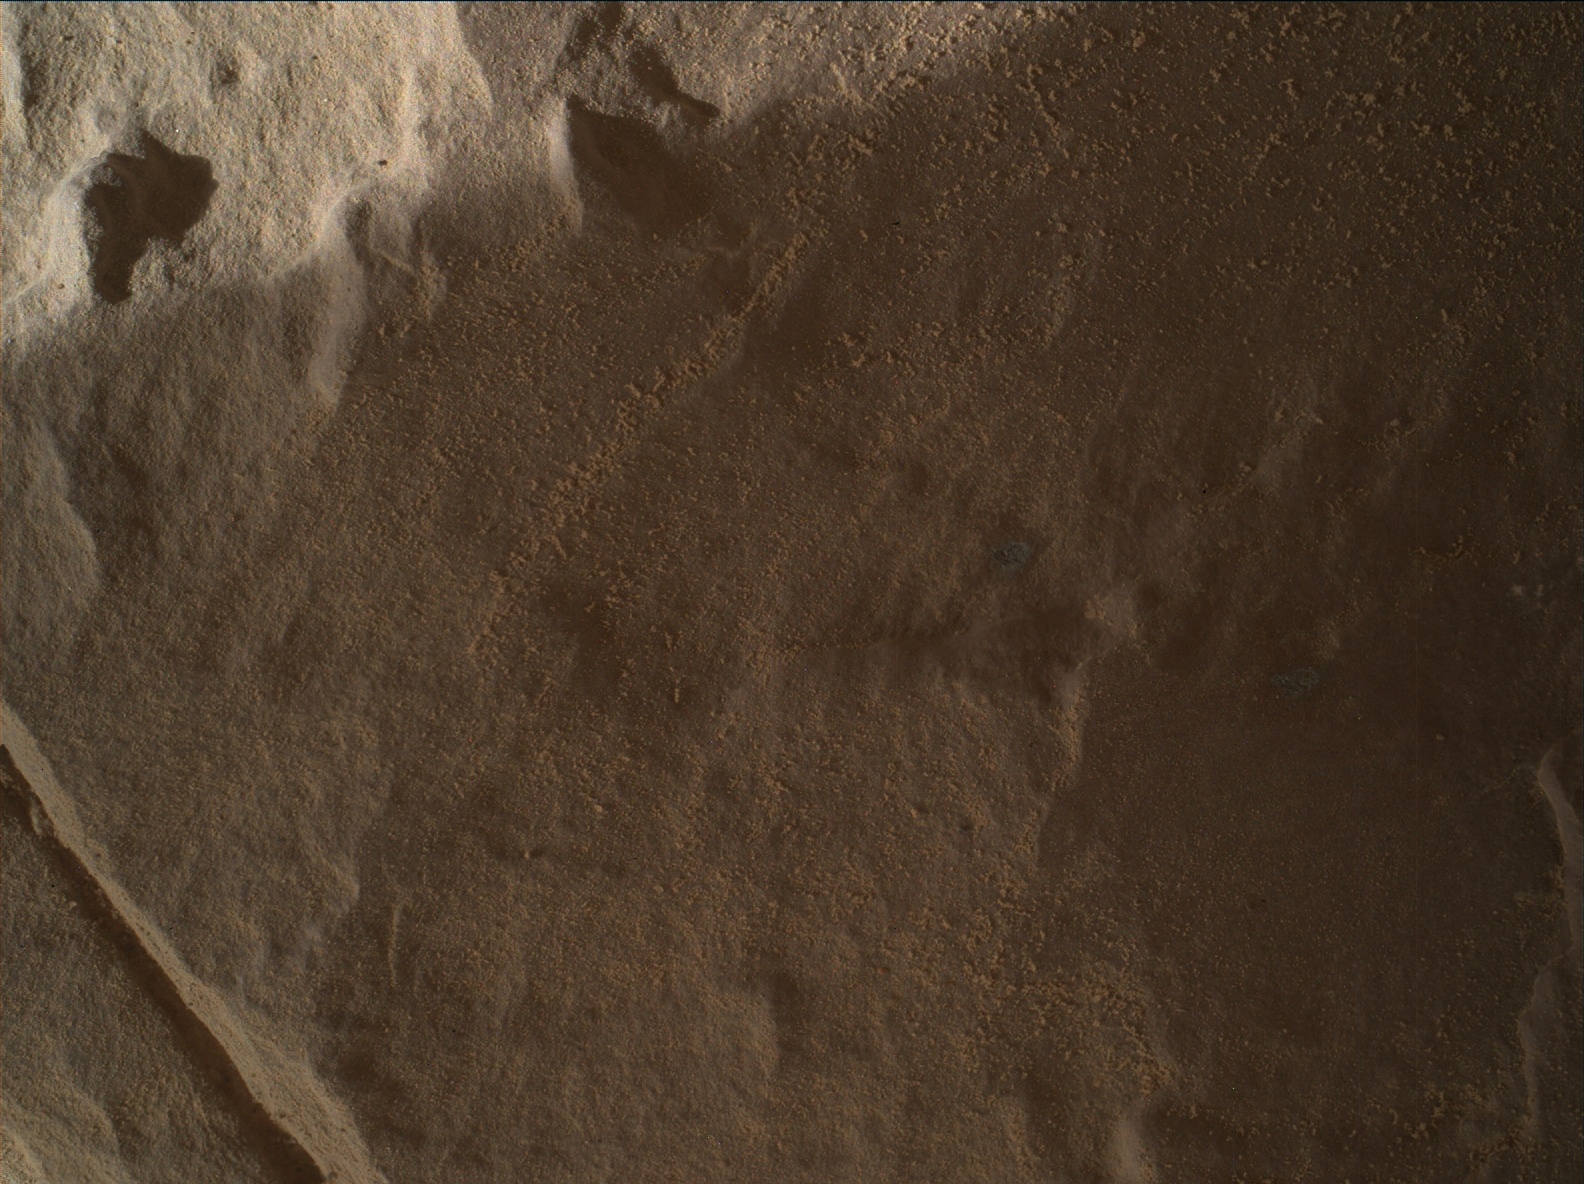 Nasa's Mars rover Curiosity acquired this image using its Mars Hand Lens Imager (MAHLI) on Sol 2003